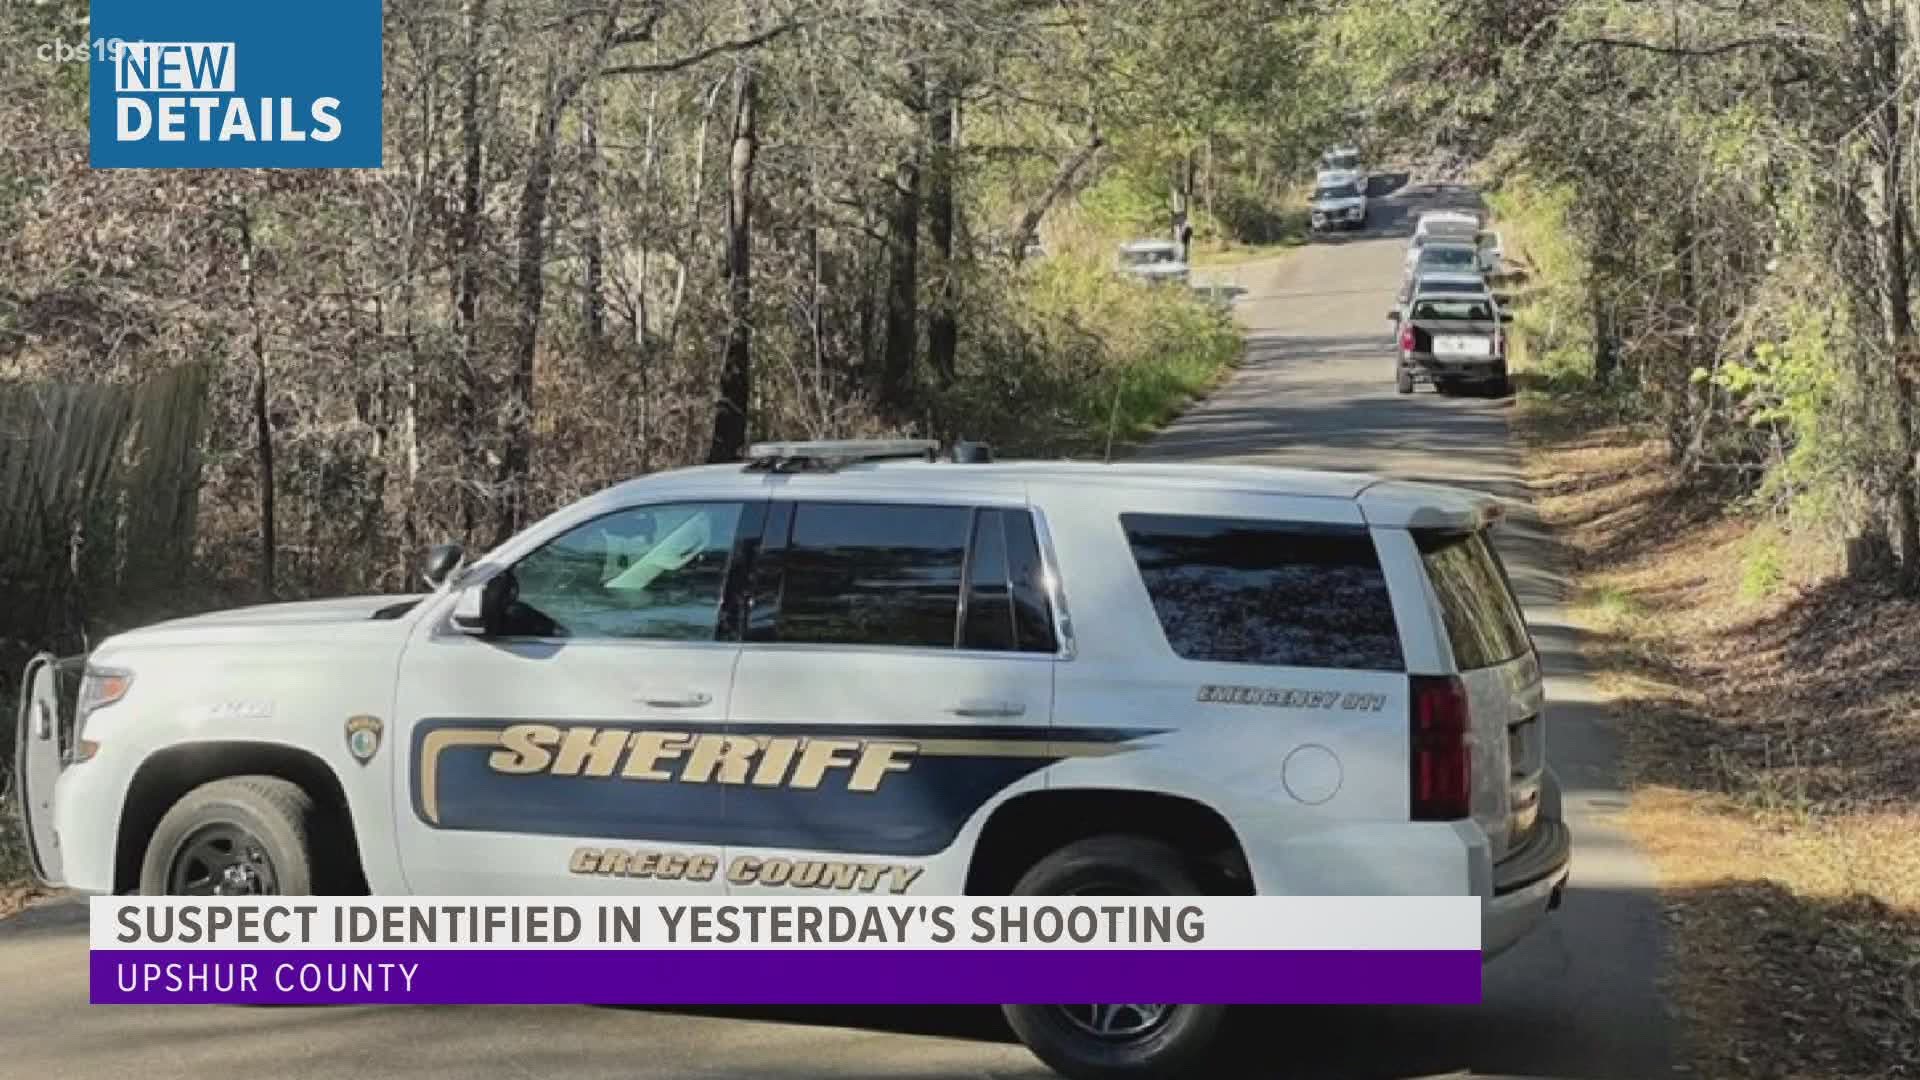 The Upshur County Sheriff's Office has identified the suspect who injured a deputy during a shootout early Monday morning.